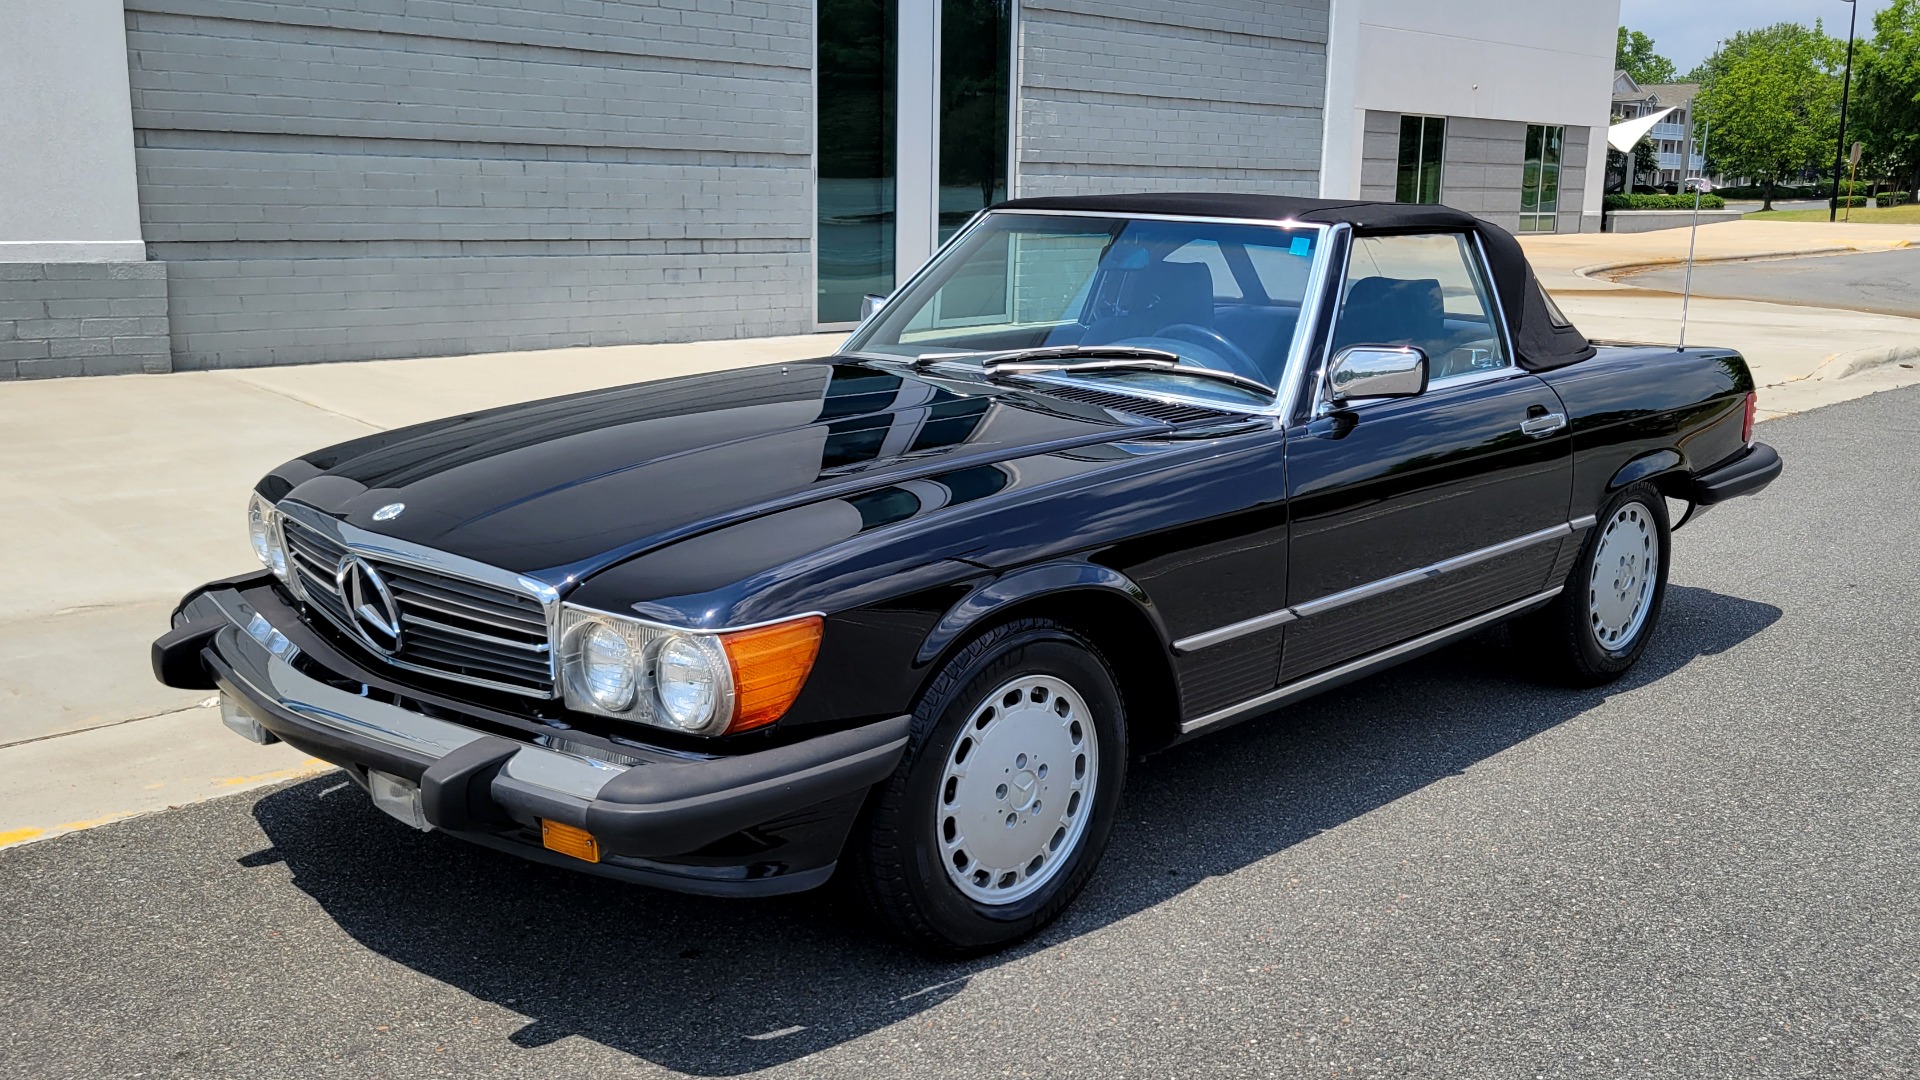 Used 1989 Mercedes-Benz 560 SERIES 560SL ROADSTER / 5.6L V8 227HP / AUTOMATIC TRANS for sale Sold at Formula Imports in Charlotte NC 28227 4